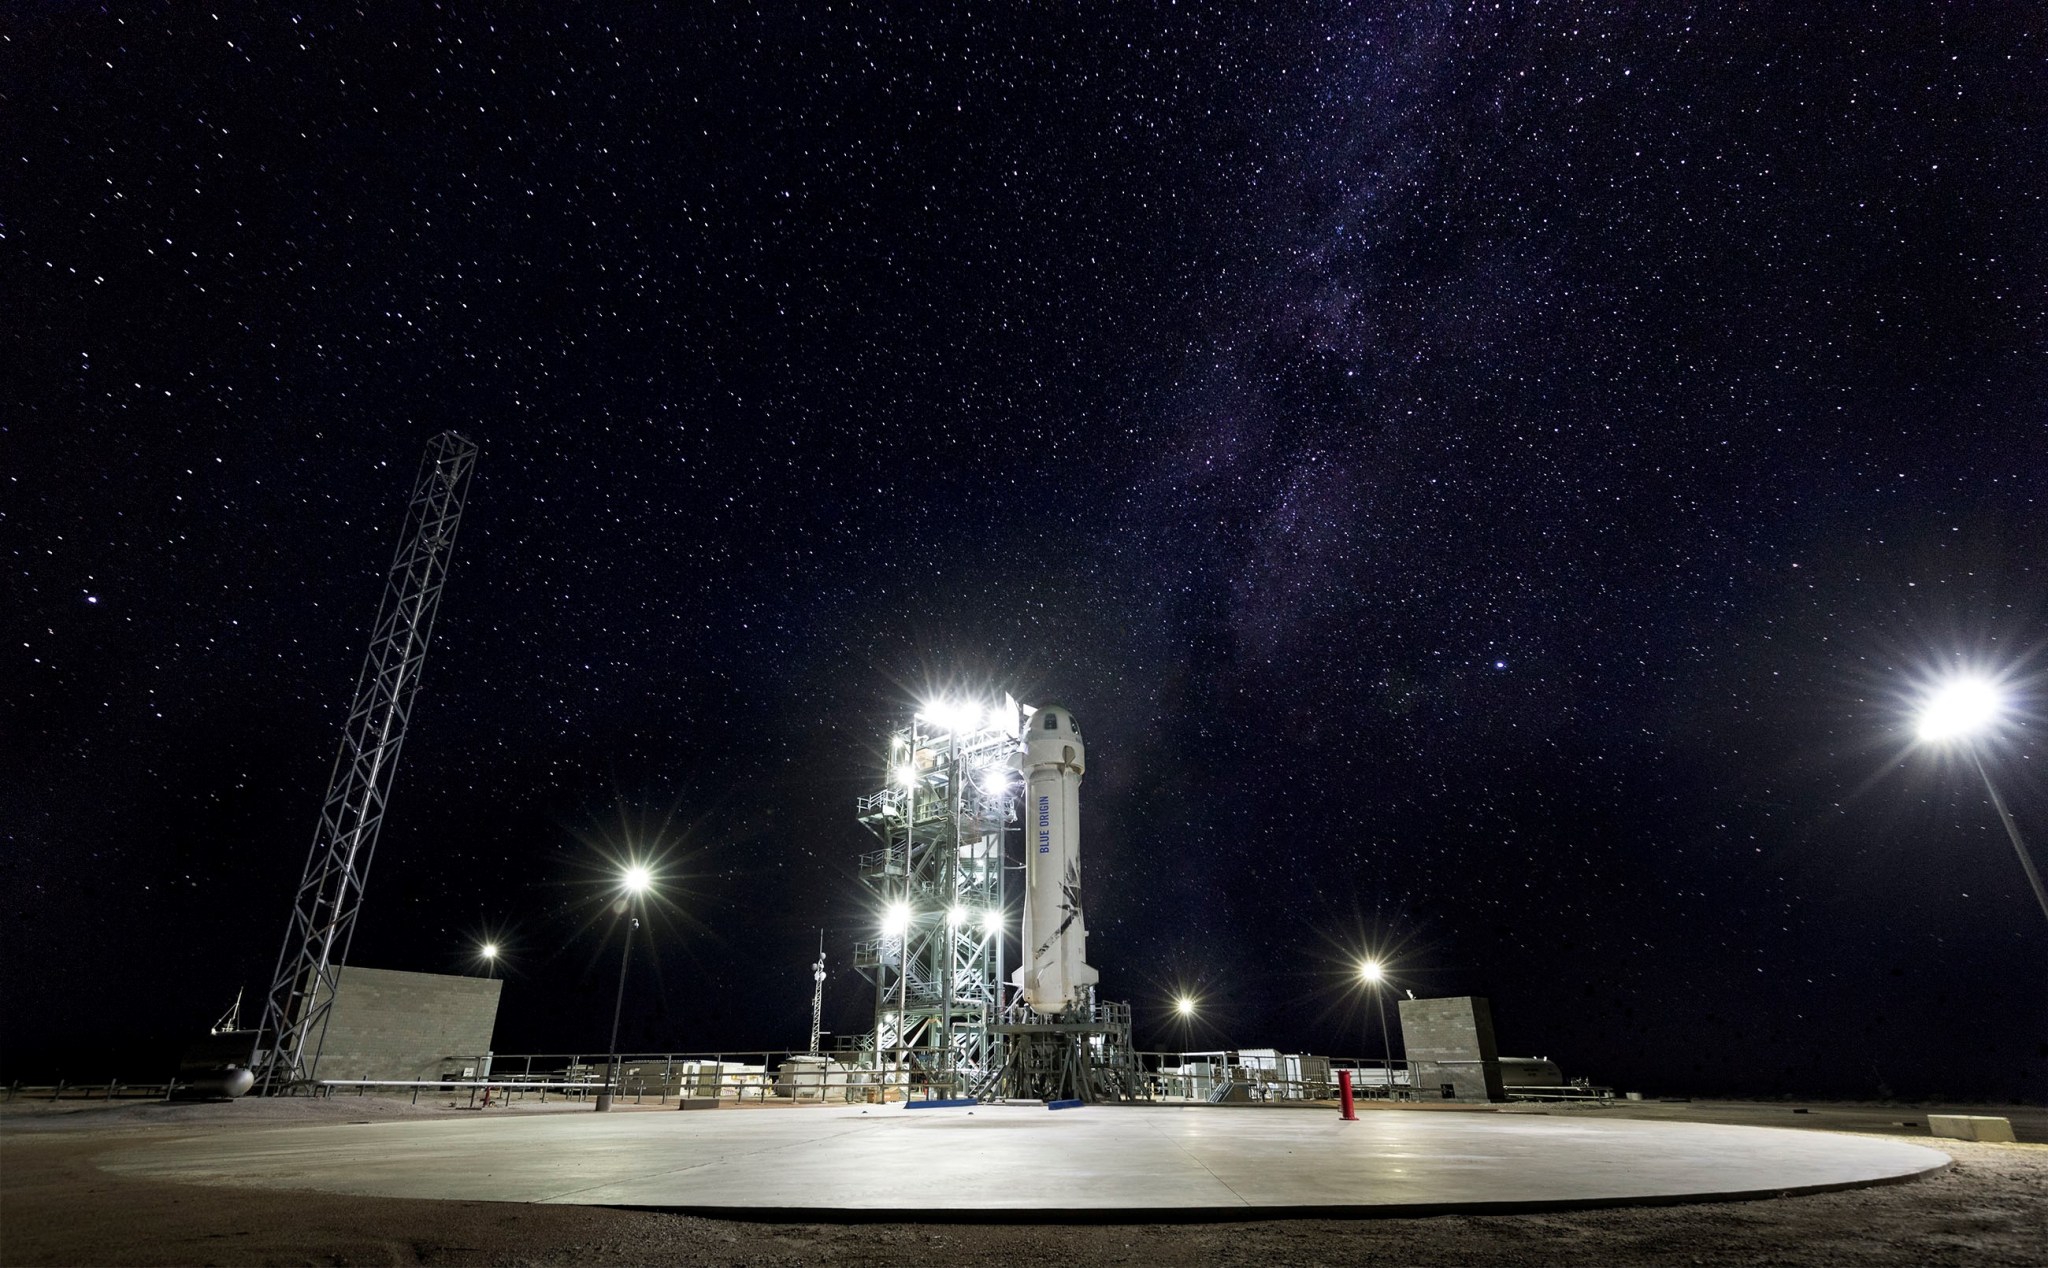 Blue Origin’s New Shepard rocket on the launchpad with night sky in background